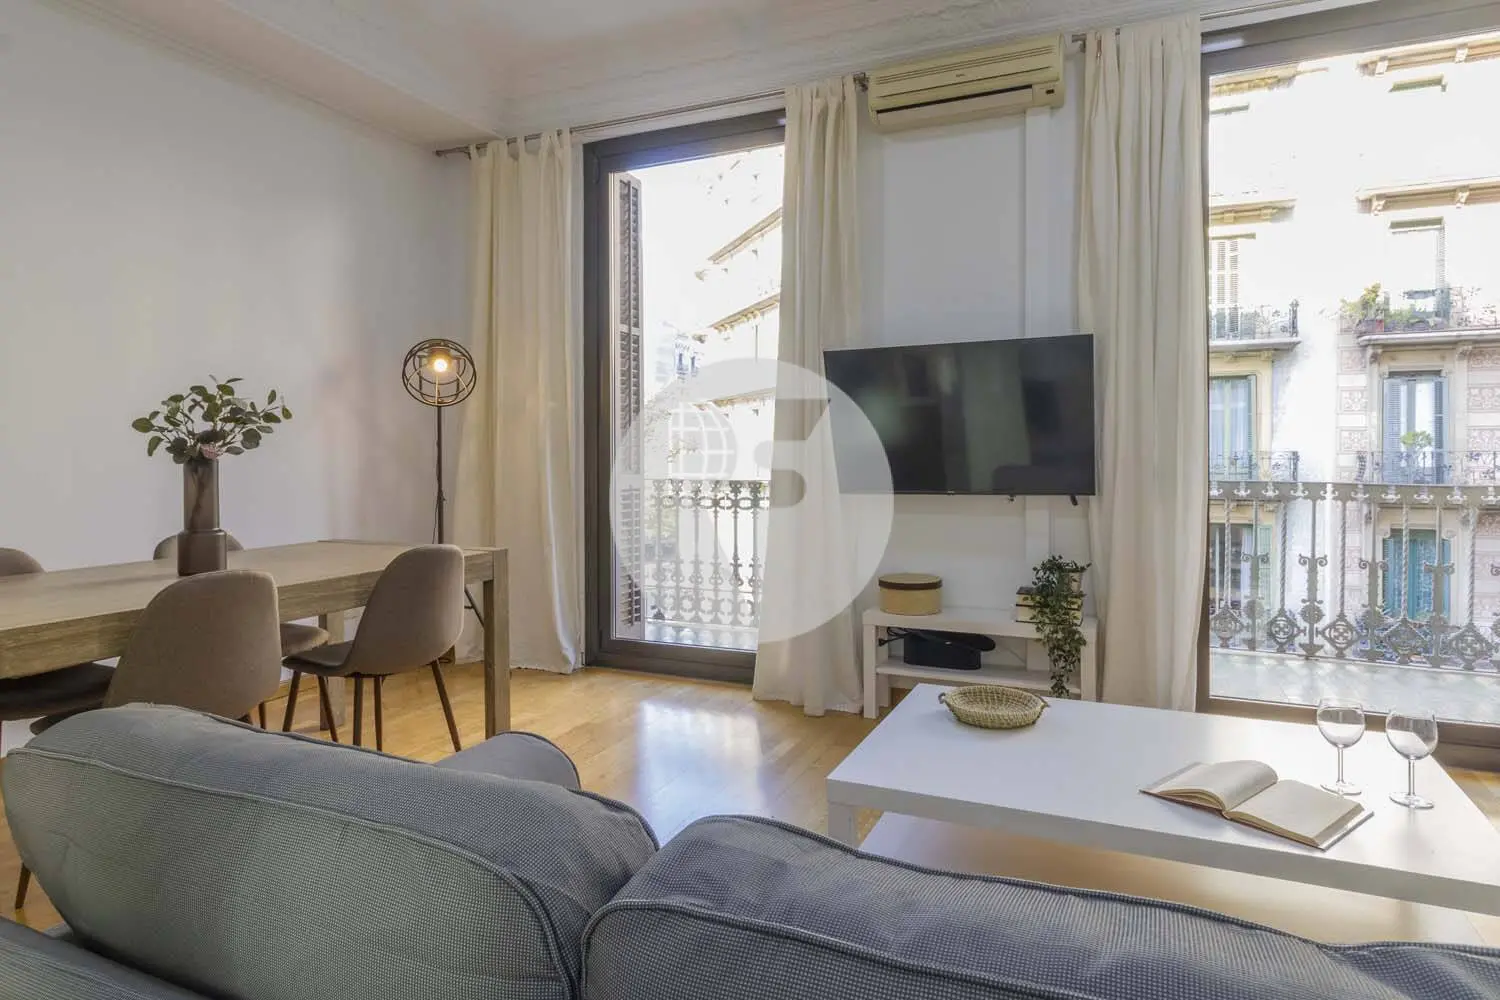 Furnished and equipped on Rosselló Street 7